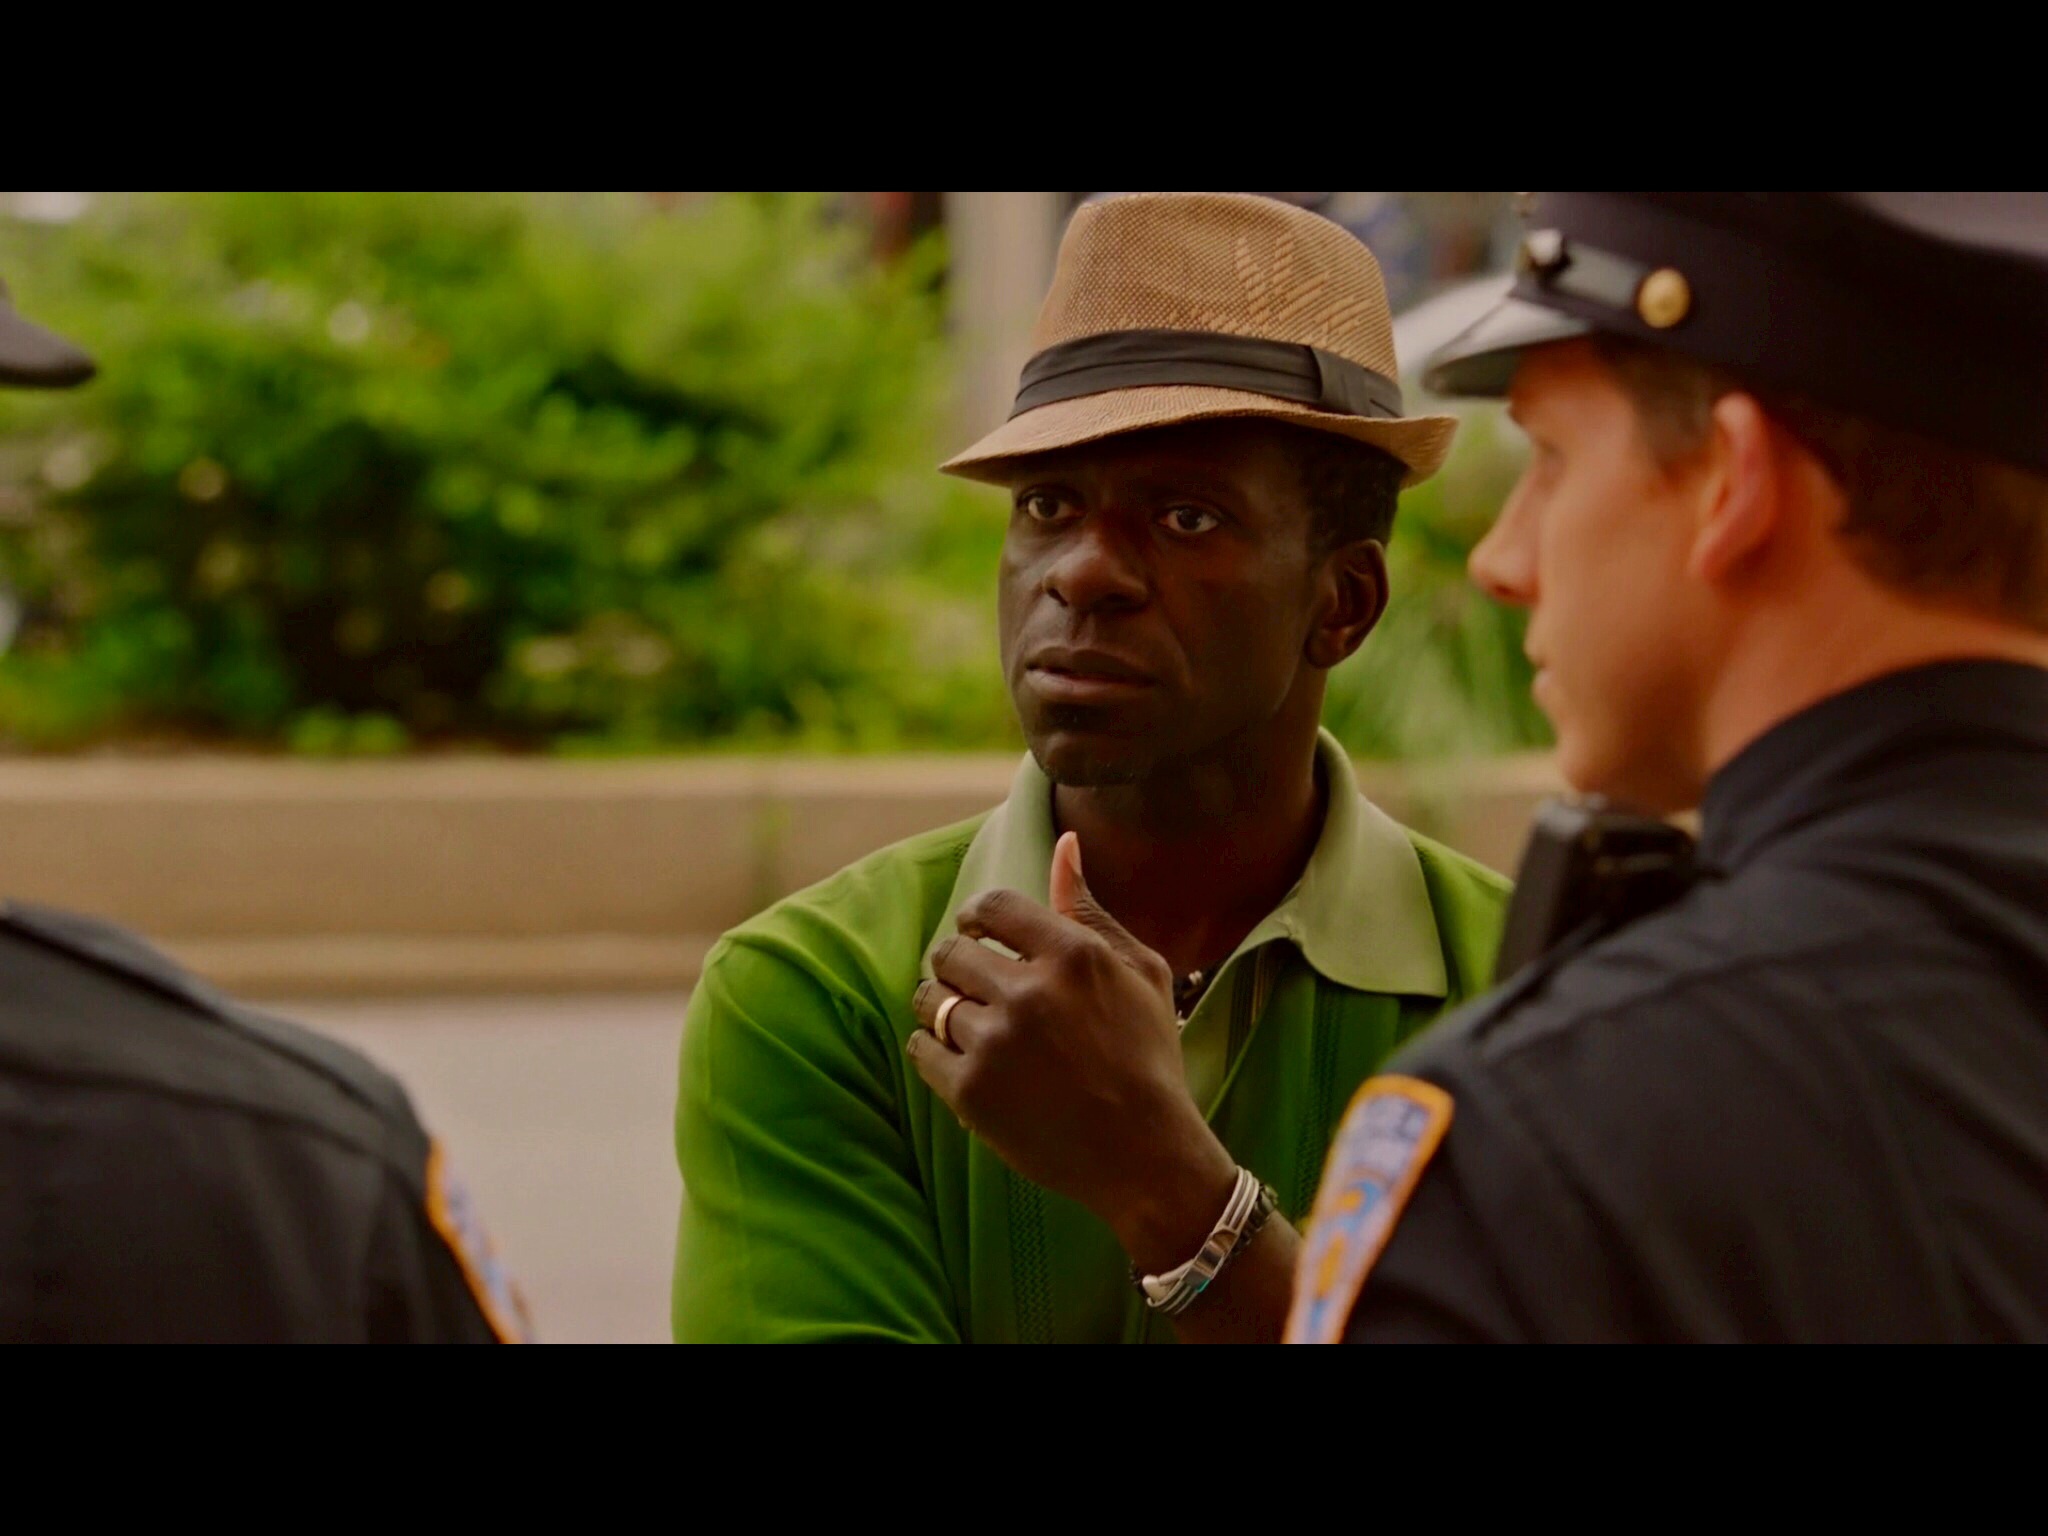 Still of Oberon K.A. Adjepong and Starks Sands in NYC 22